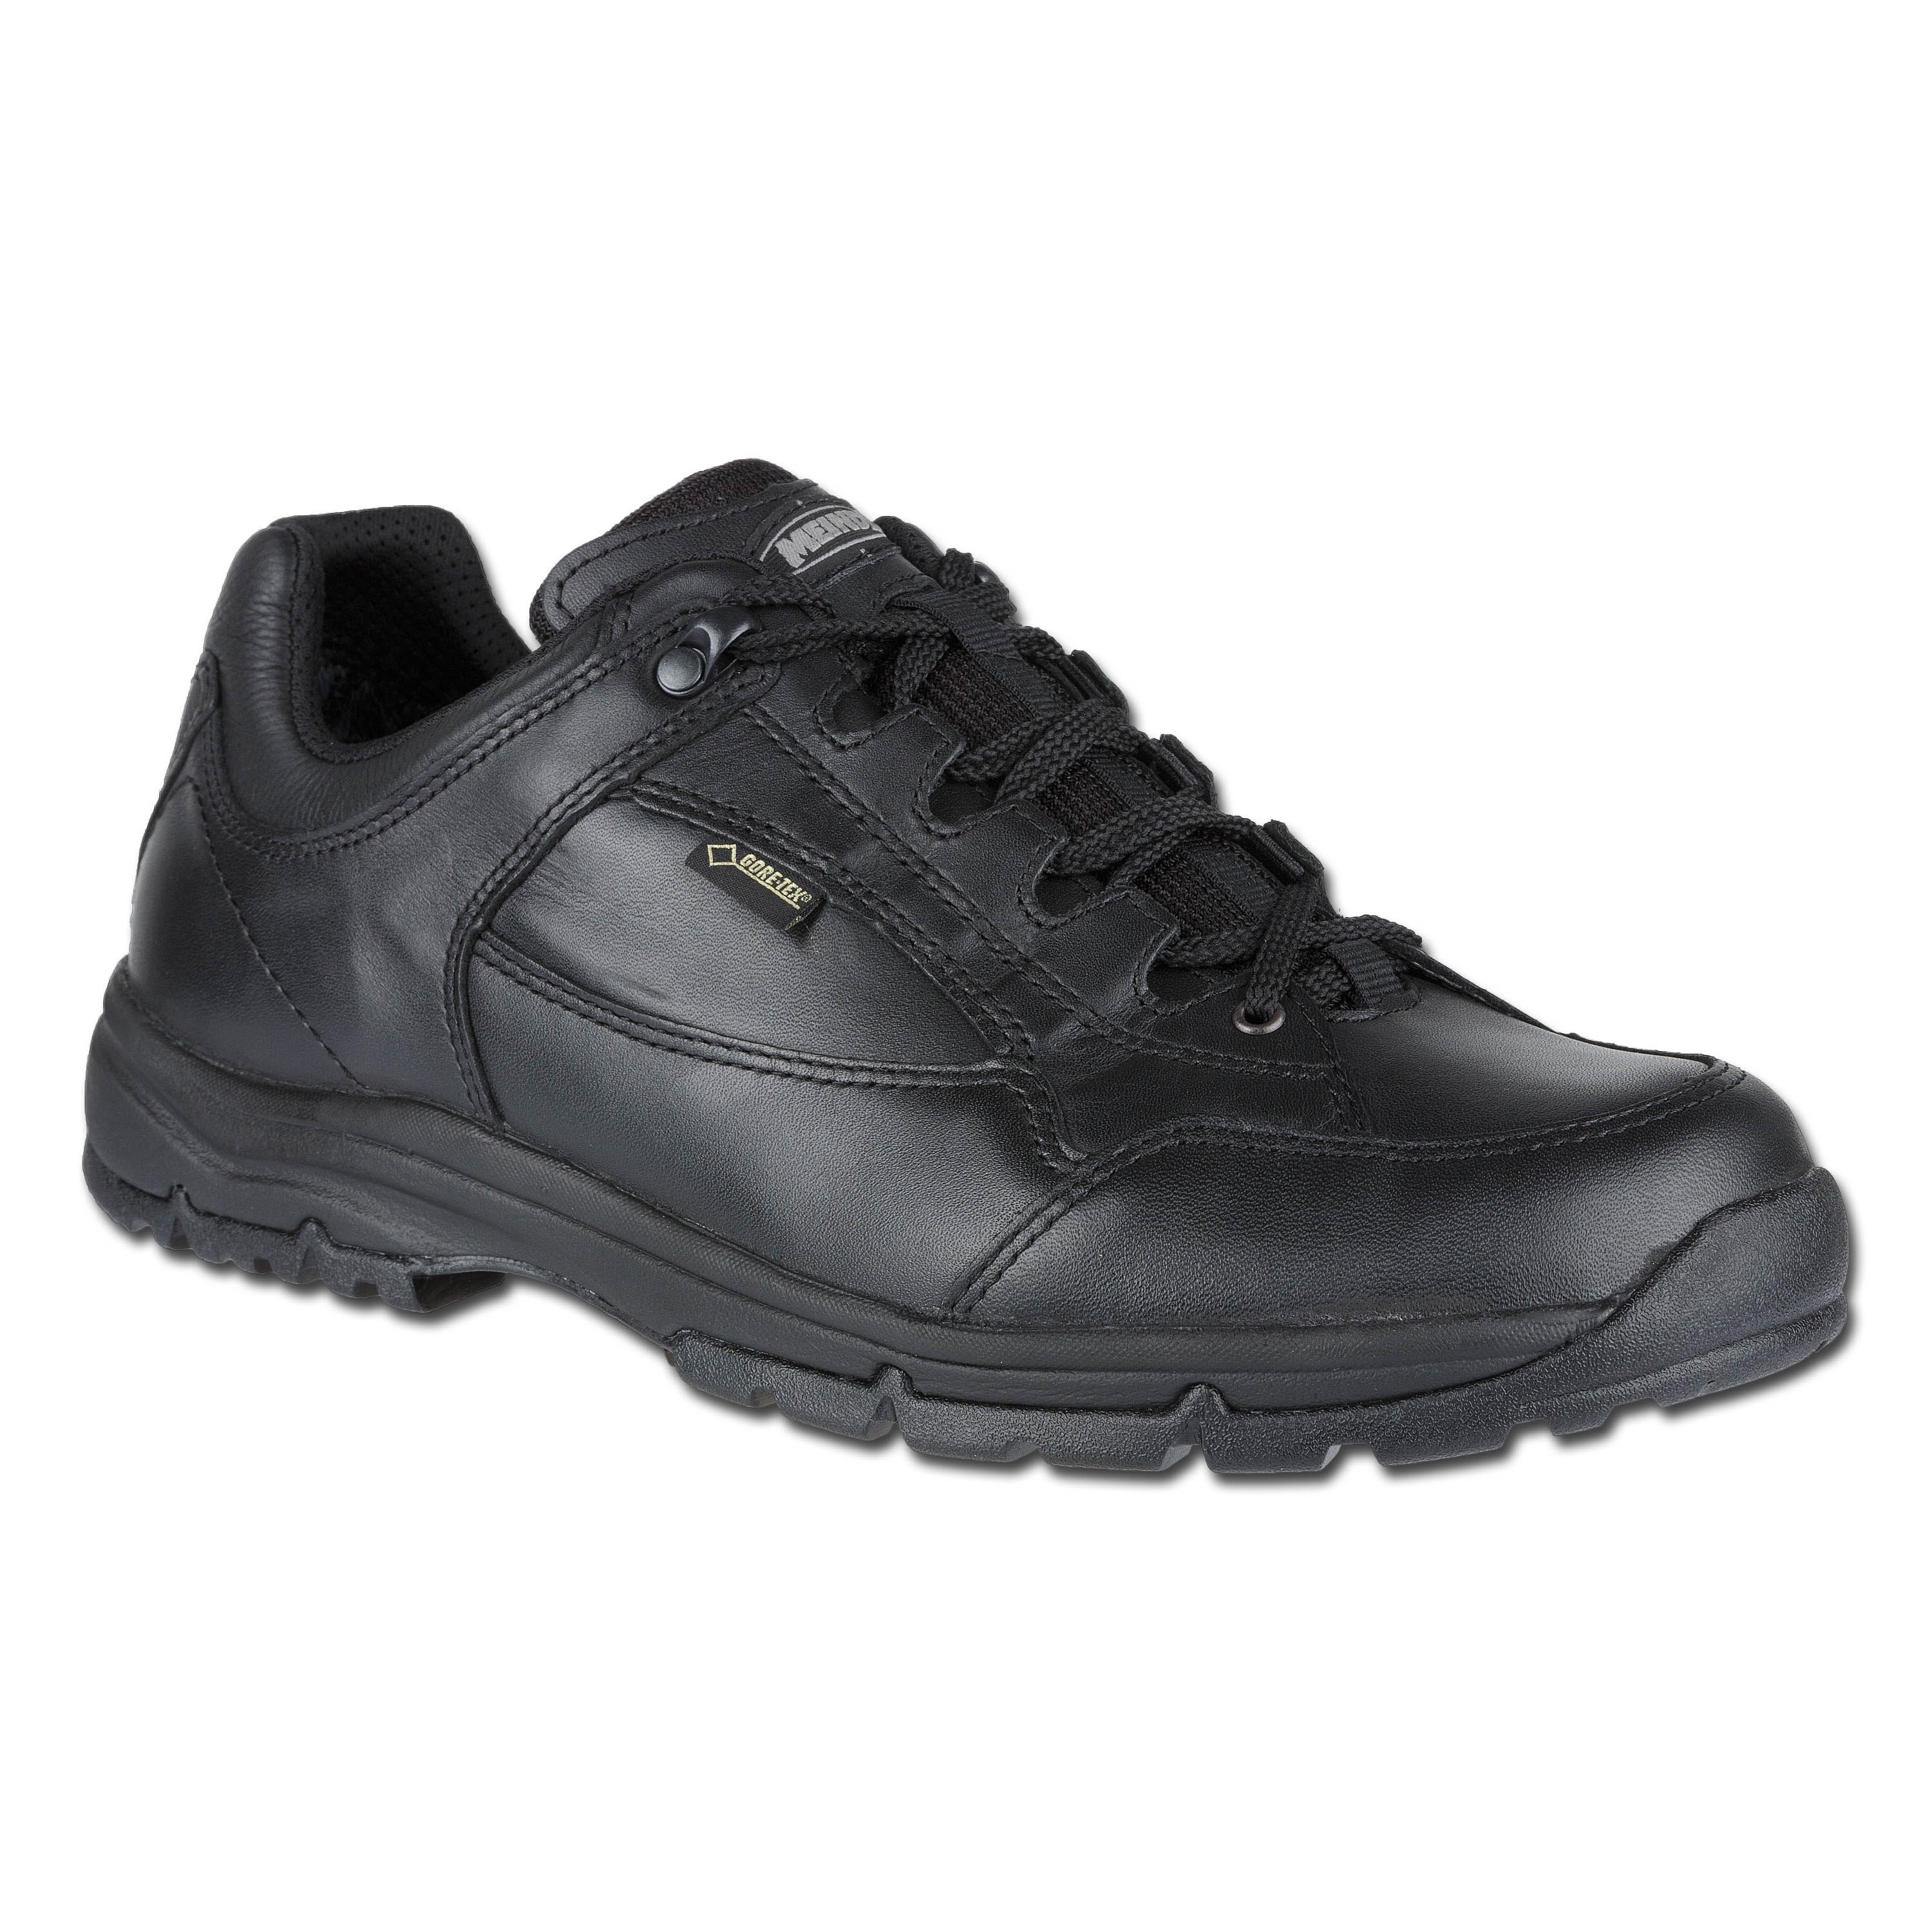 Purchase the Meindl Shoe Security black by ASMC